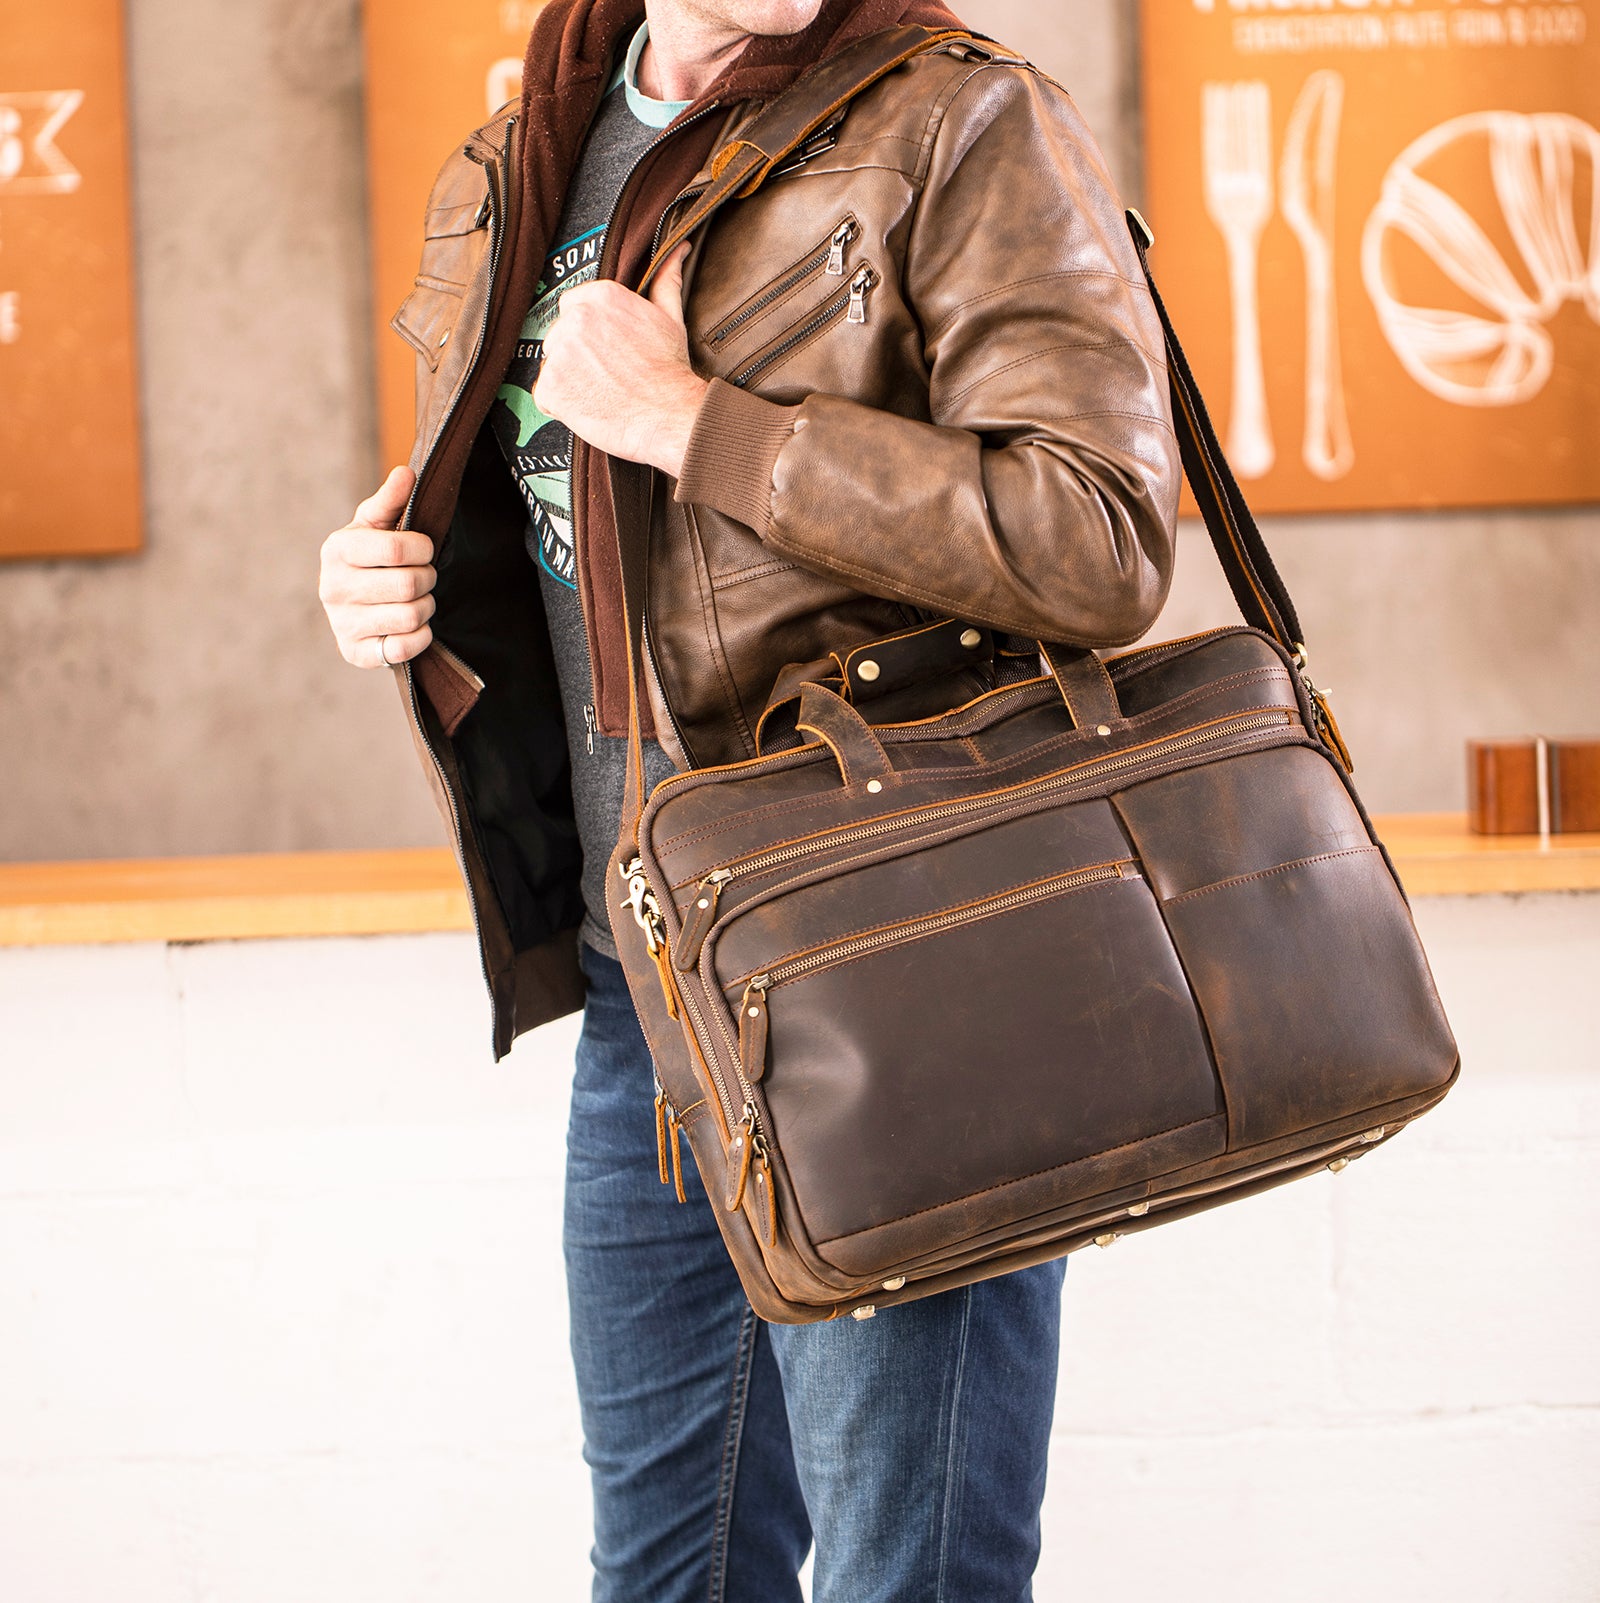 Men's Leather Messenger Bags and Laptop Bags